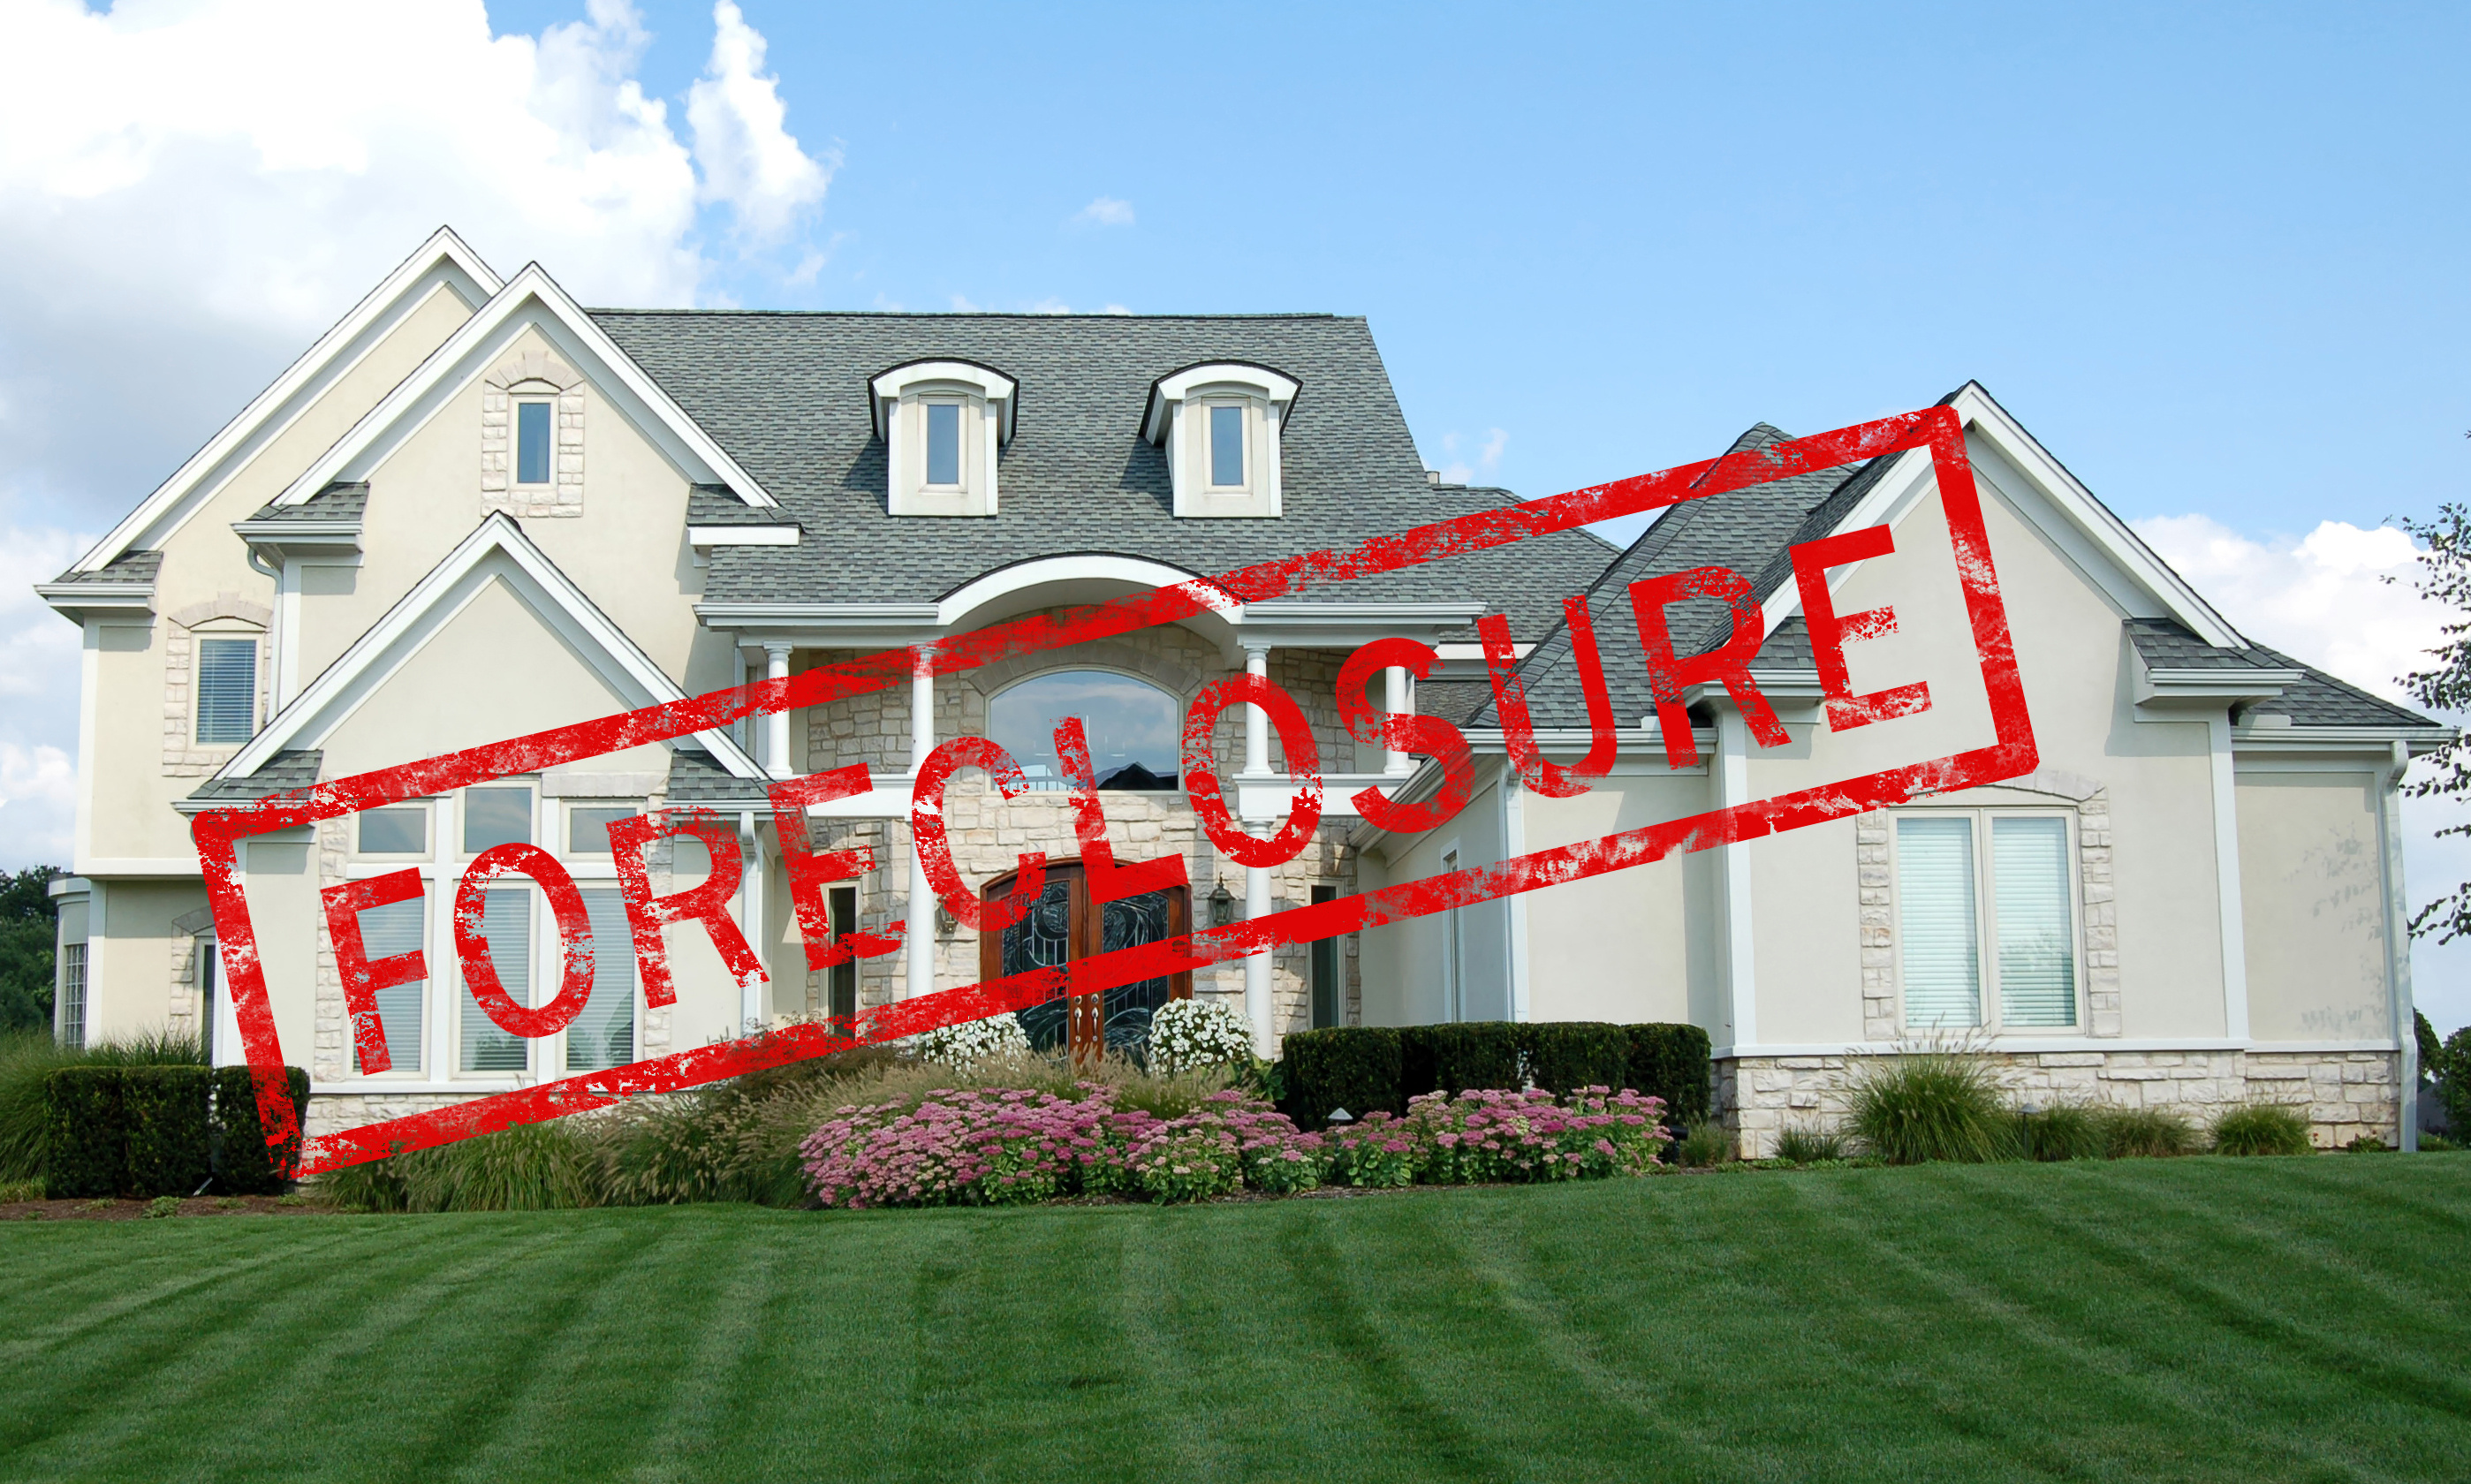 Call VanderWaal Appraisal Group when you need valuations pertaining to King foreclosures